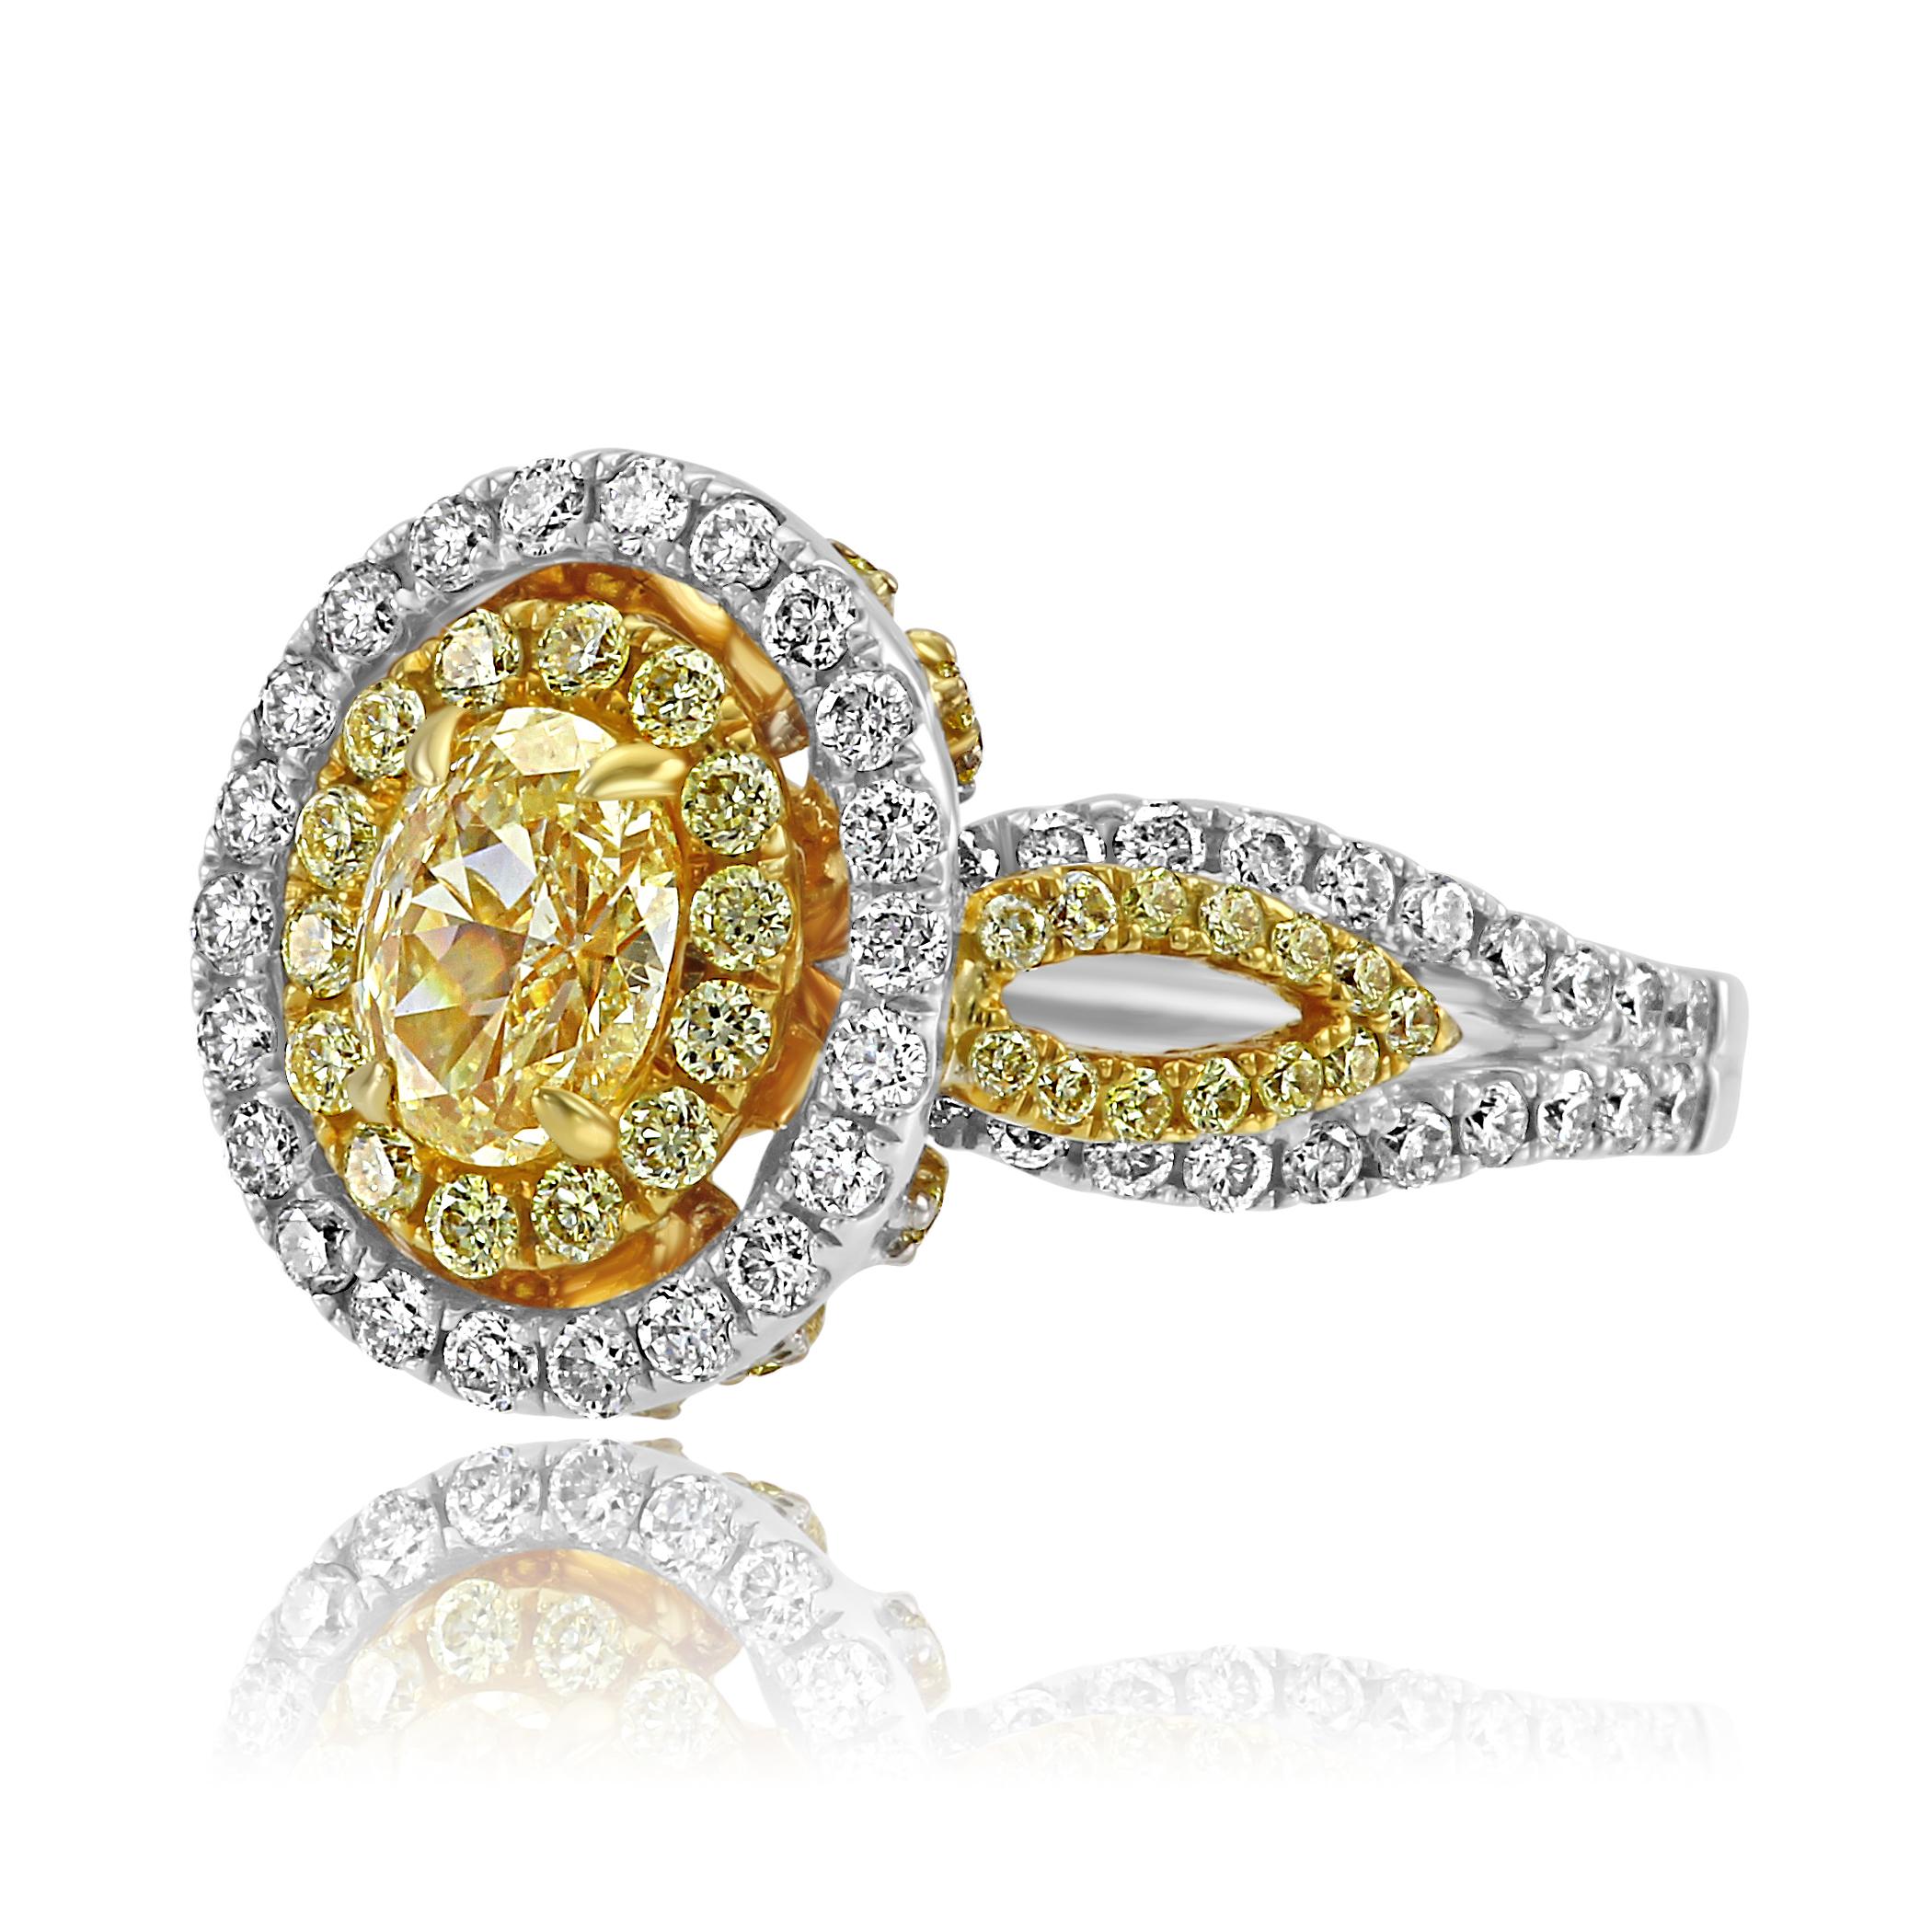 EGL USA certified Natural Fancy Yellow Diamond Oval SI1 Clarity 0.80 carat encircled in a Double Halo of Natural Fancy Yellow Round Diamonds 0.60 Carat White Round Diamond 0.71 Carat in a Gorgeous 18K White and Yellow Gold Bridal Fashion